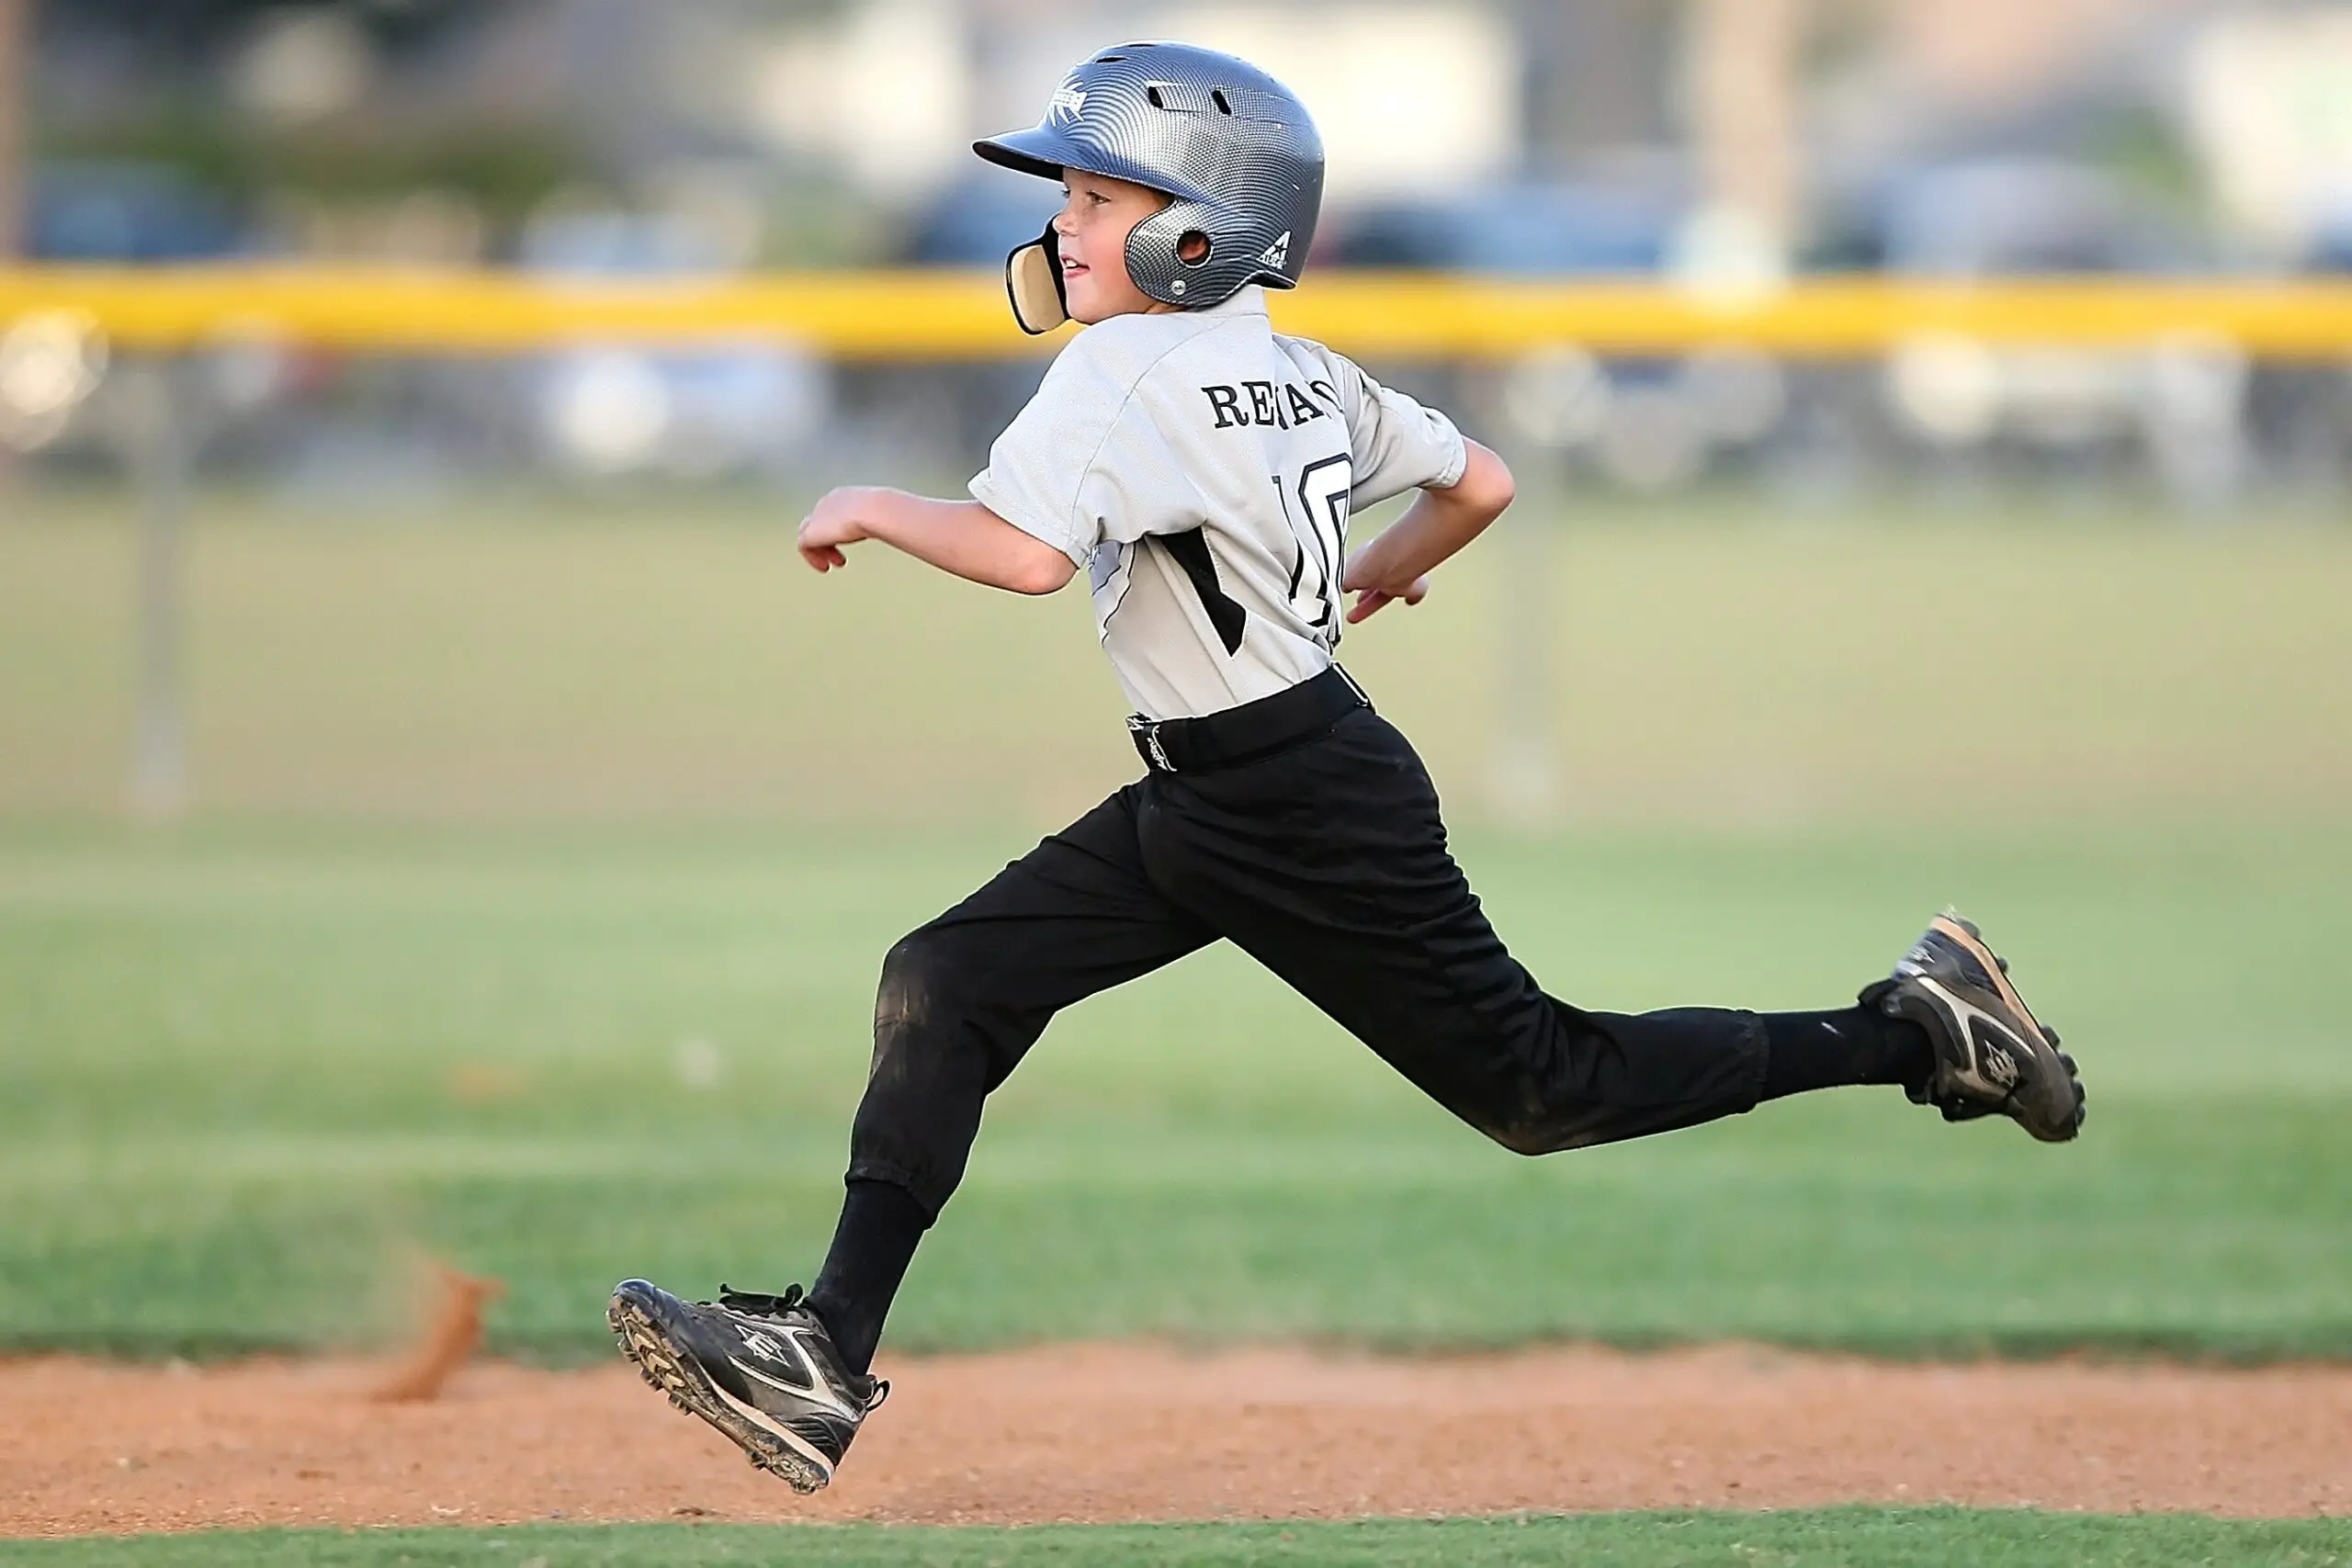 What Pitches Should A 12-Year-Old Throw?